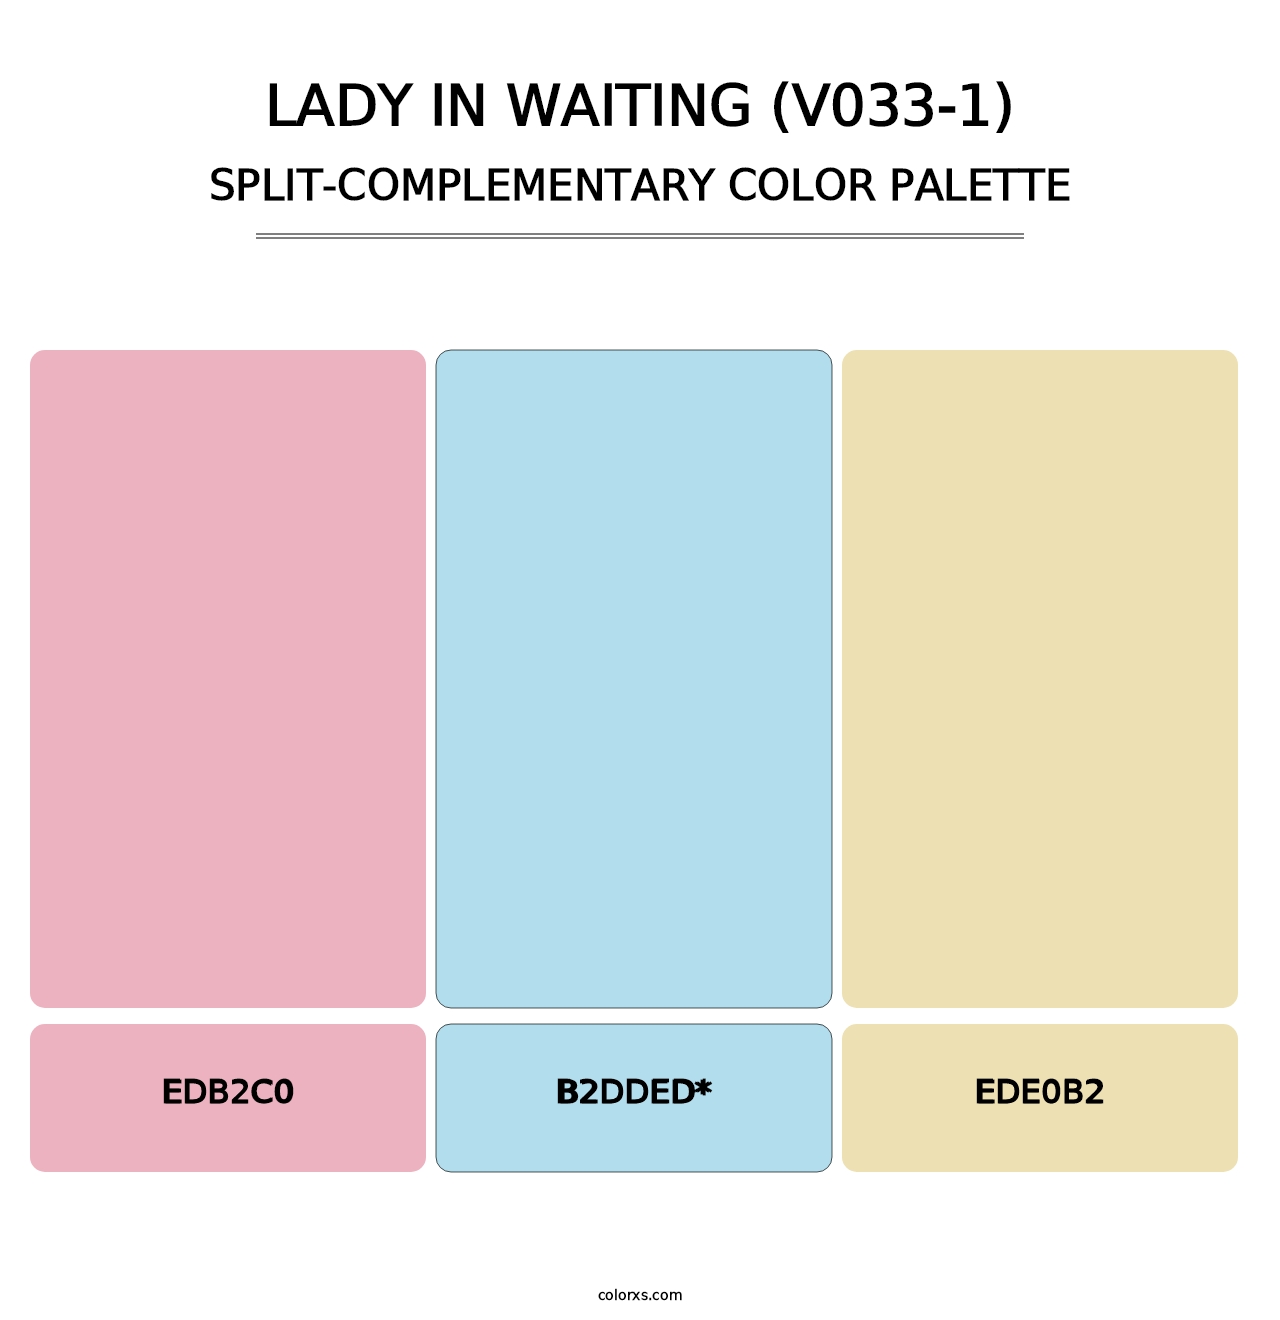 Lady in Waiting (V033-1) - Split-Complementary Color Palette